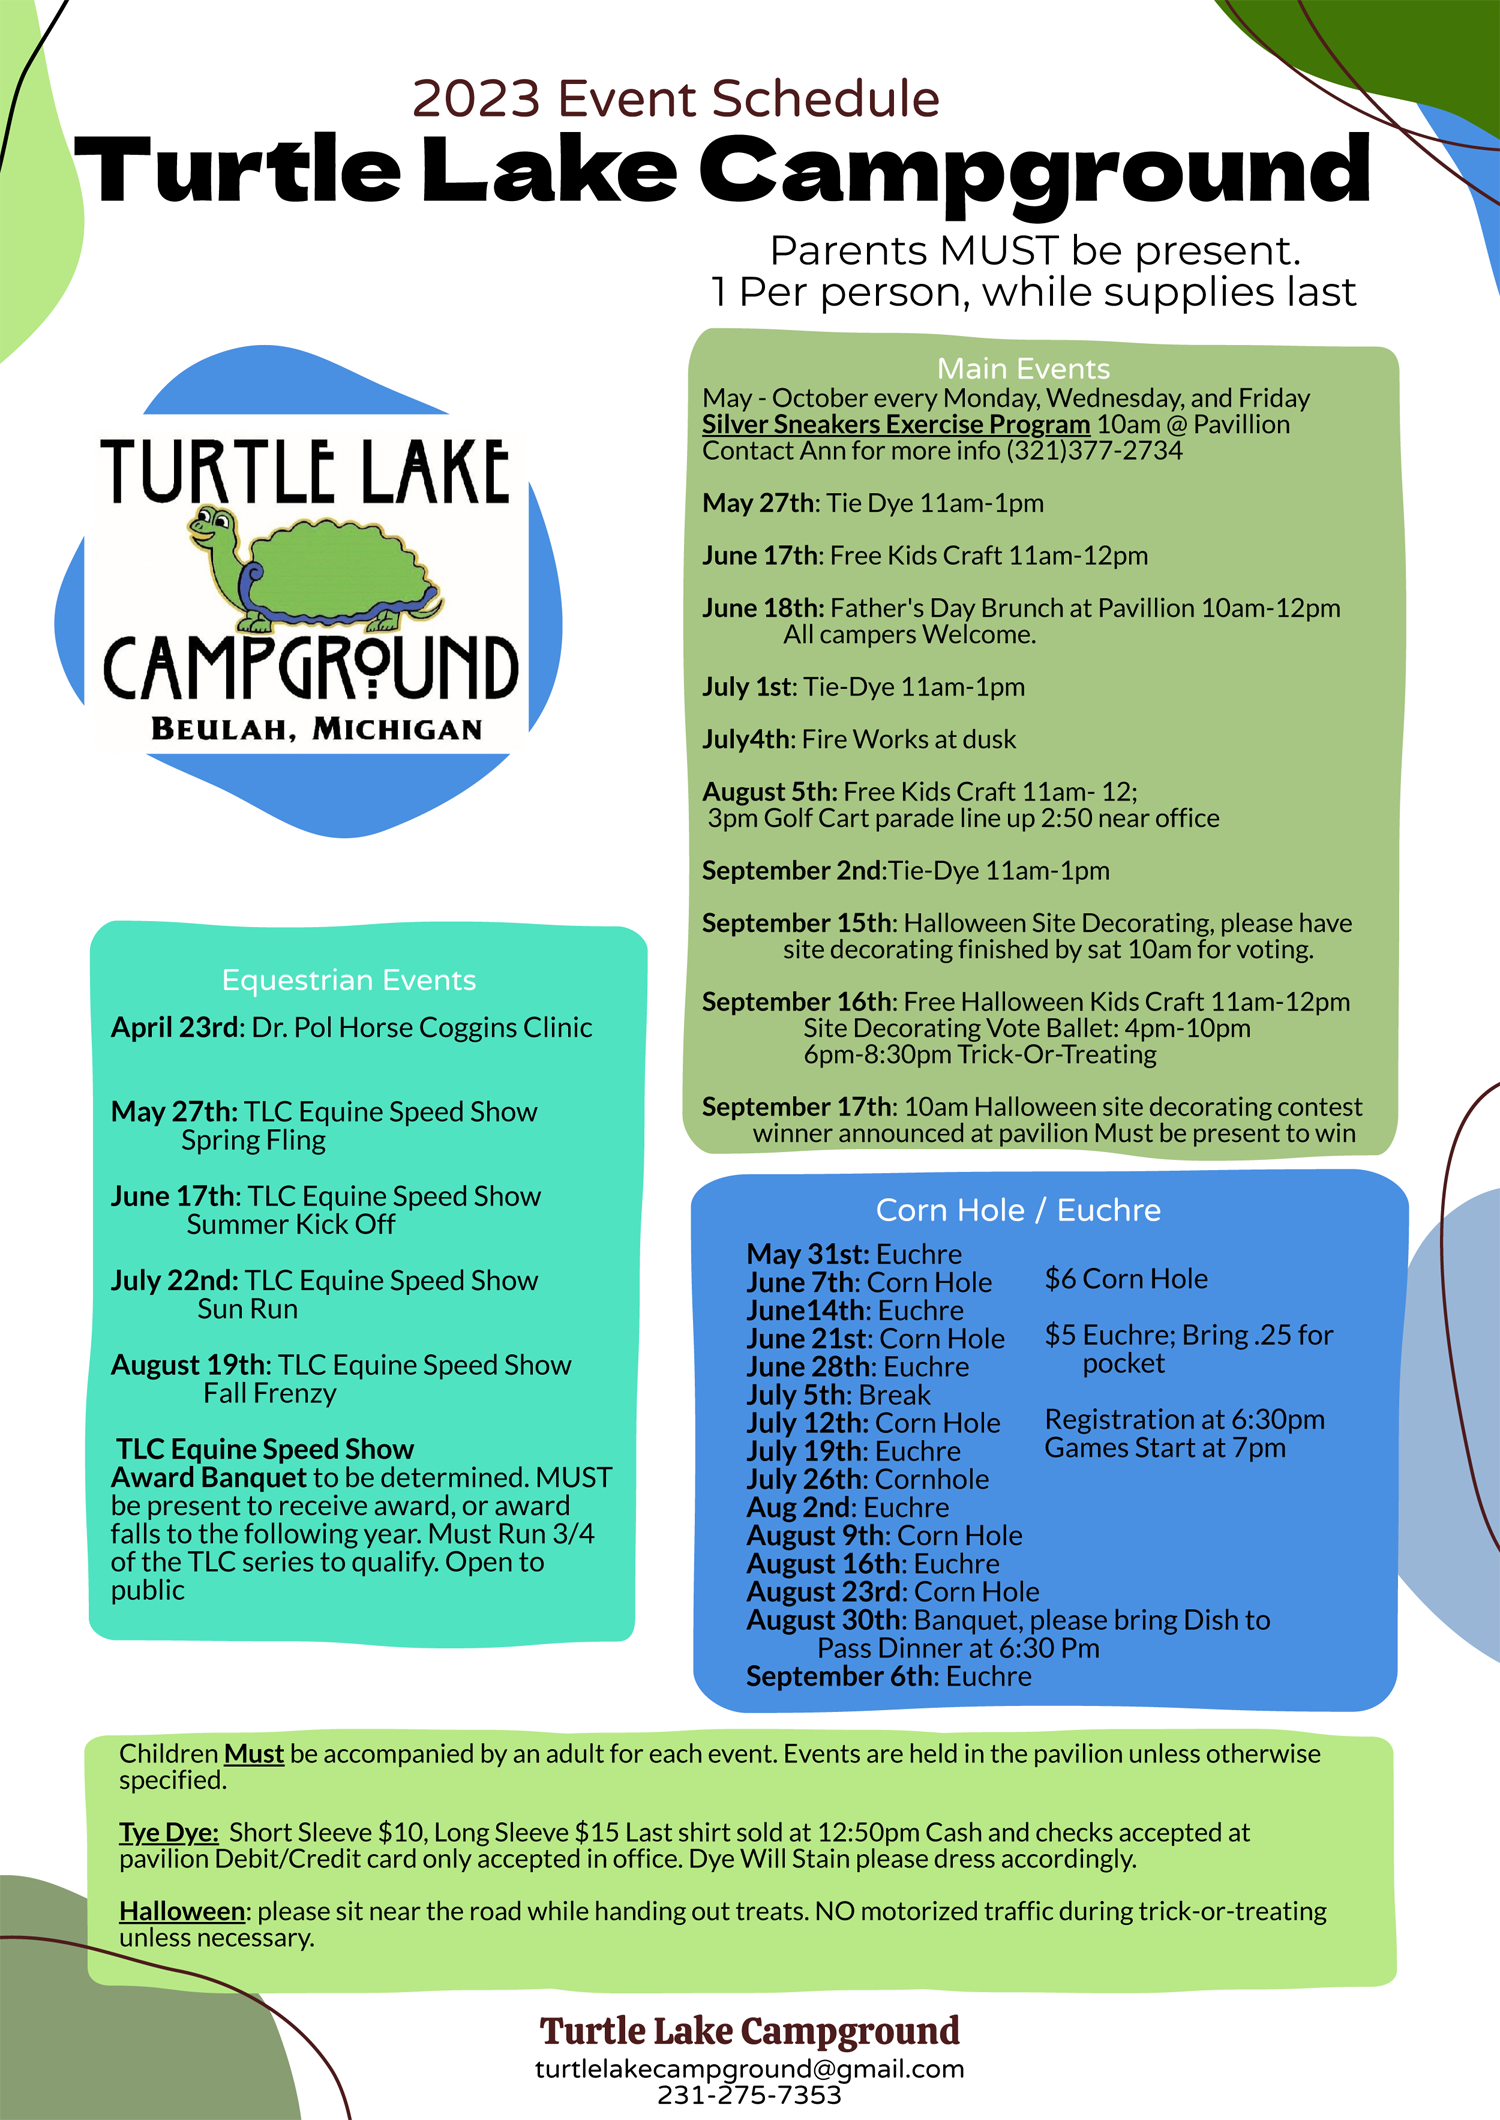 2023 Event Schedule for Turtle Lake Campground.